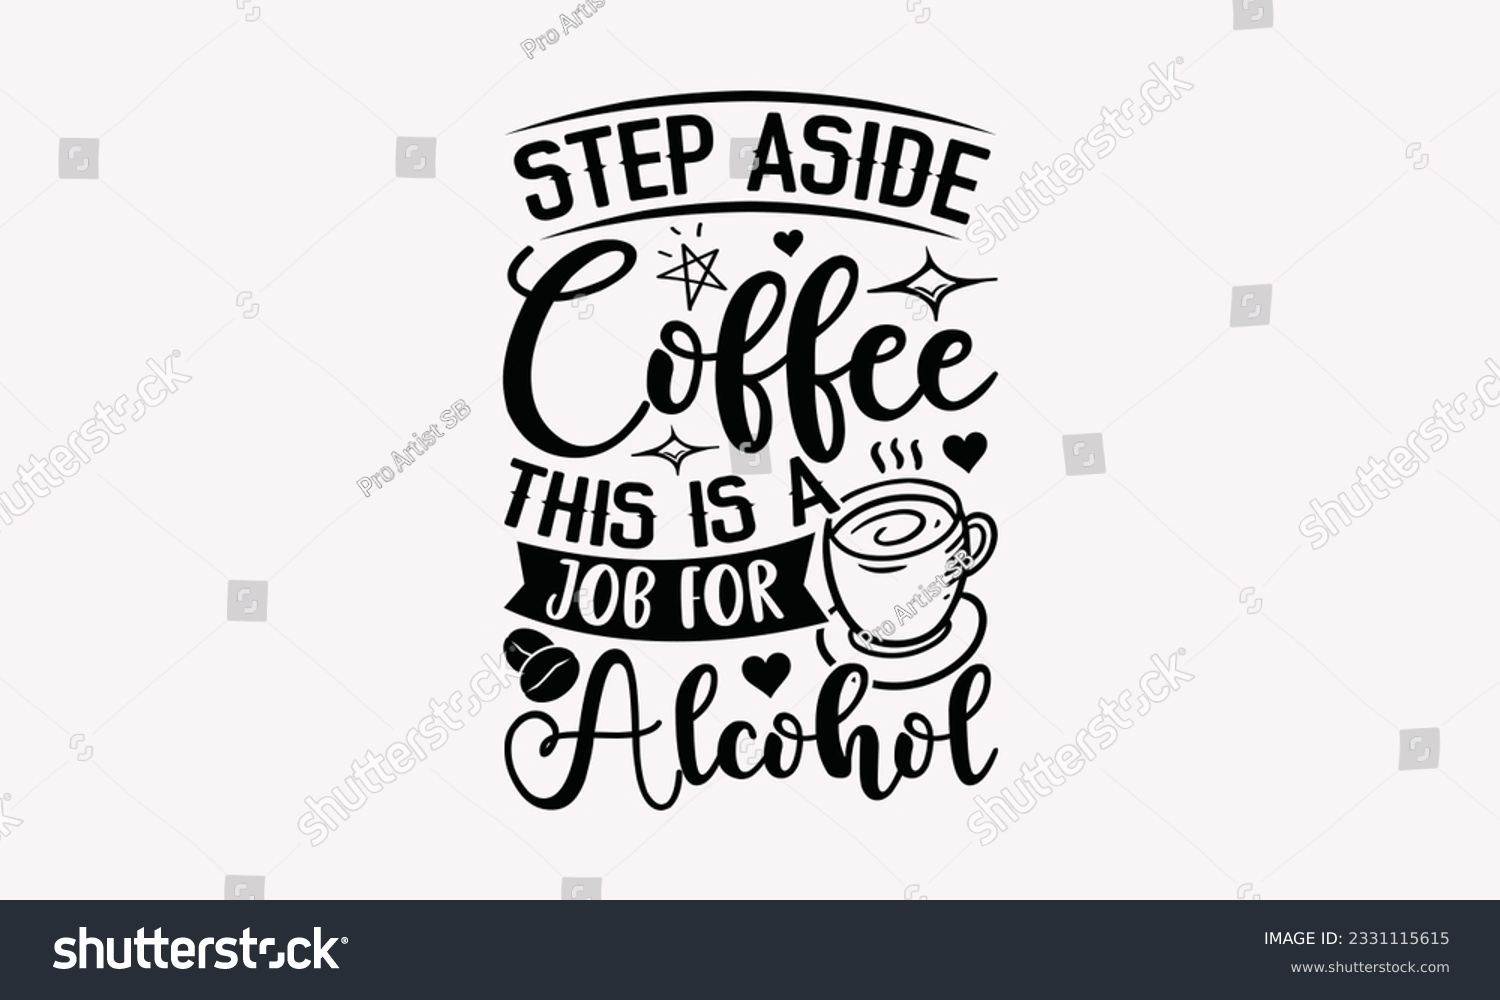 SVG of Step aside coffee this is a job for alcohol - Coffee SVG Design Template, Cheer Quotes, Hand drawn lettering phrase, Isolated on white background. svg